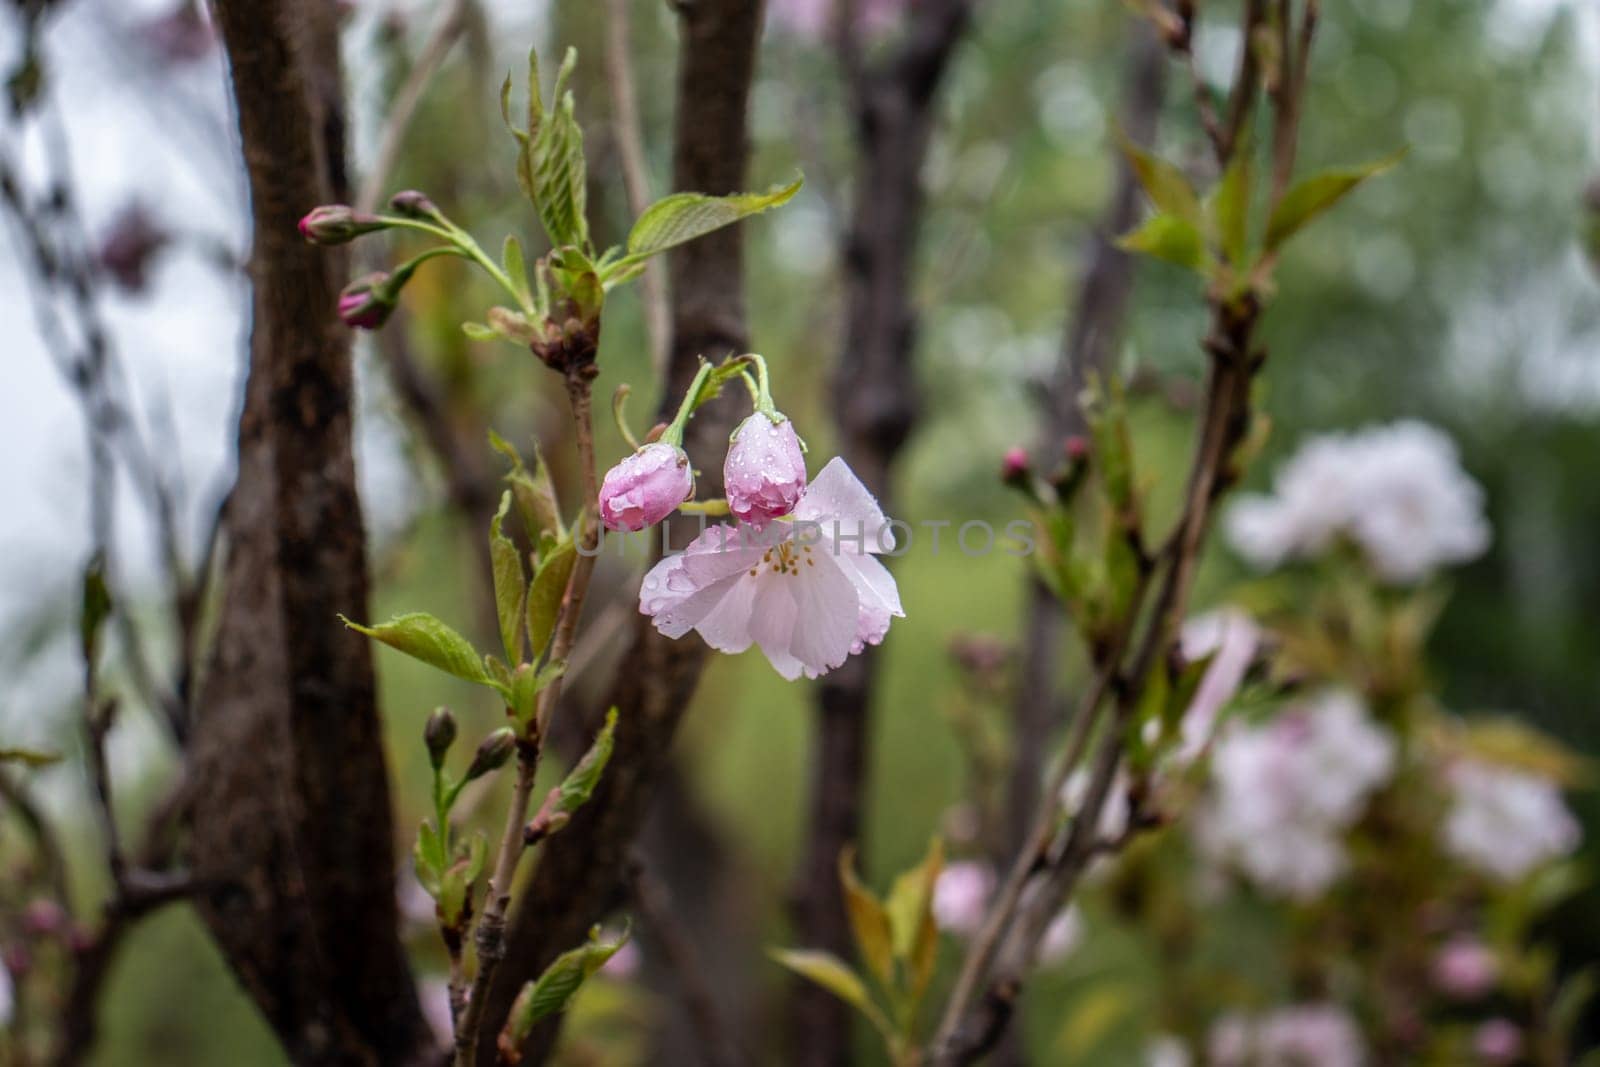 Close up pink sakura flower on tree concept photo. Photography with blurred background. Countryside at spring season. Spring garden blossom background